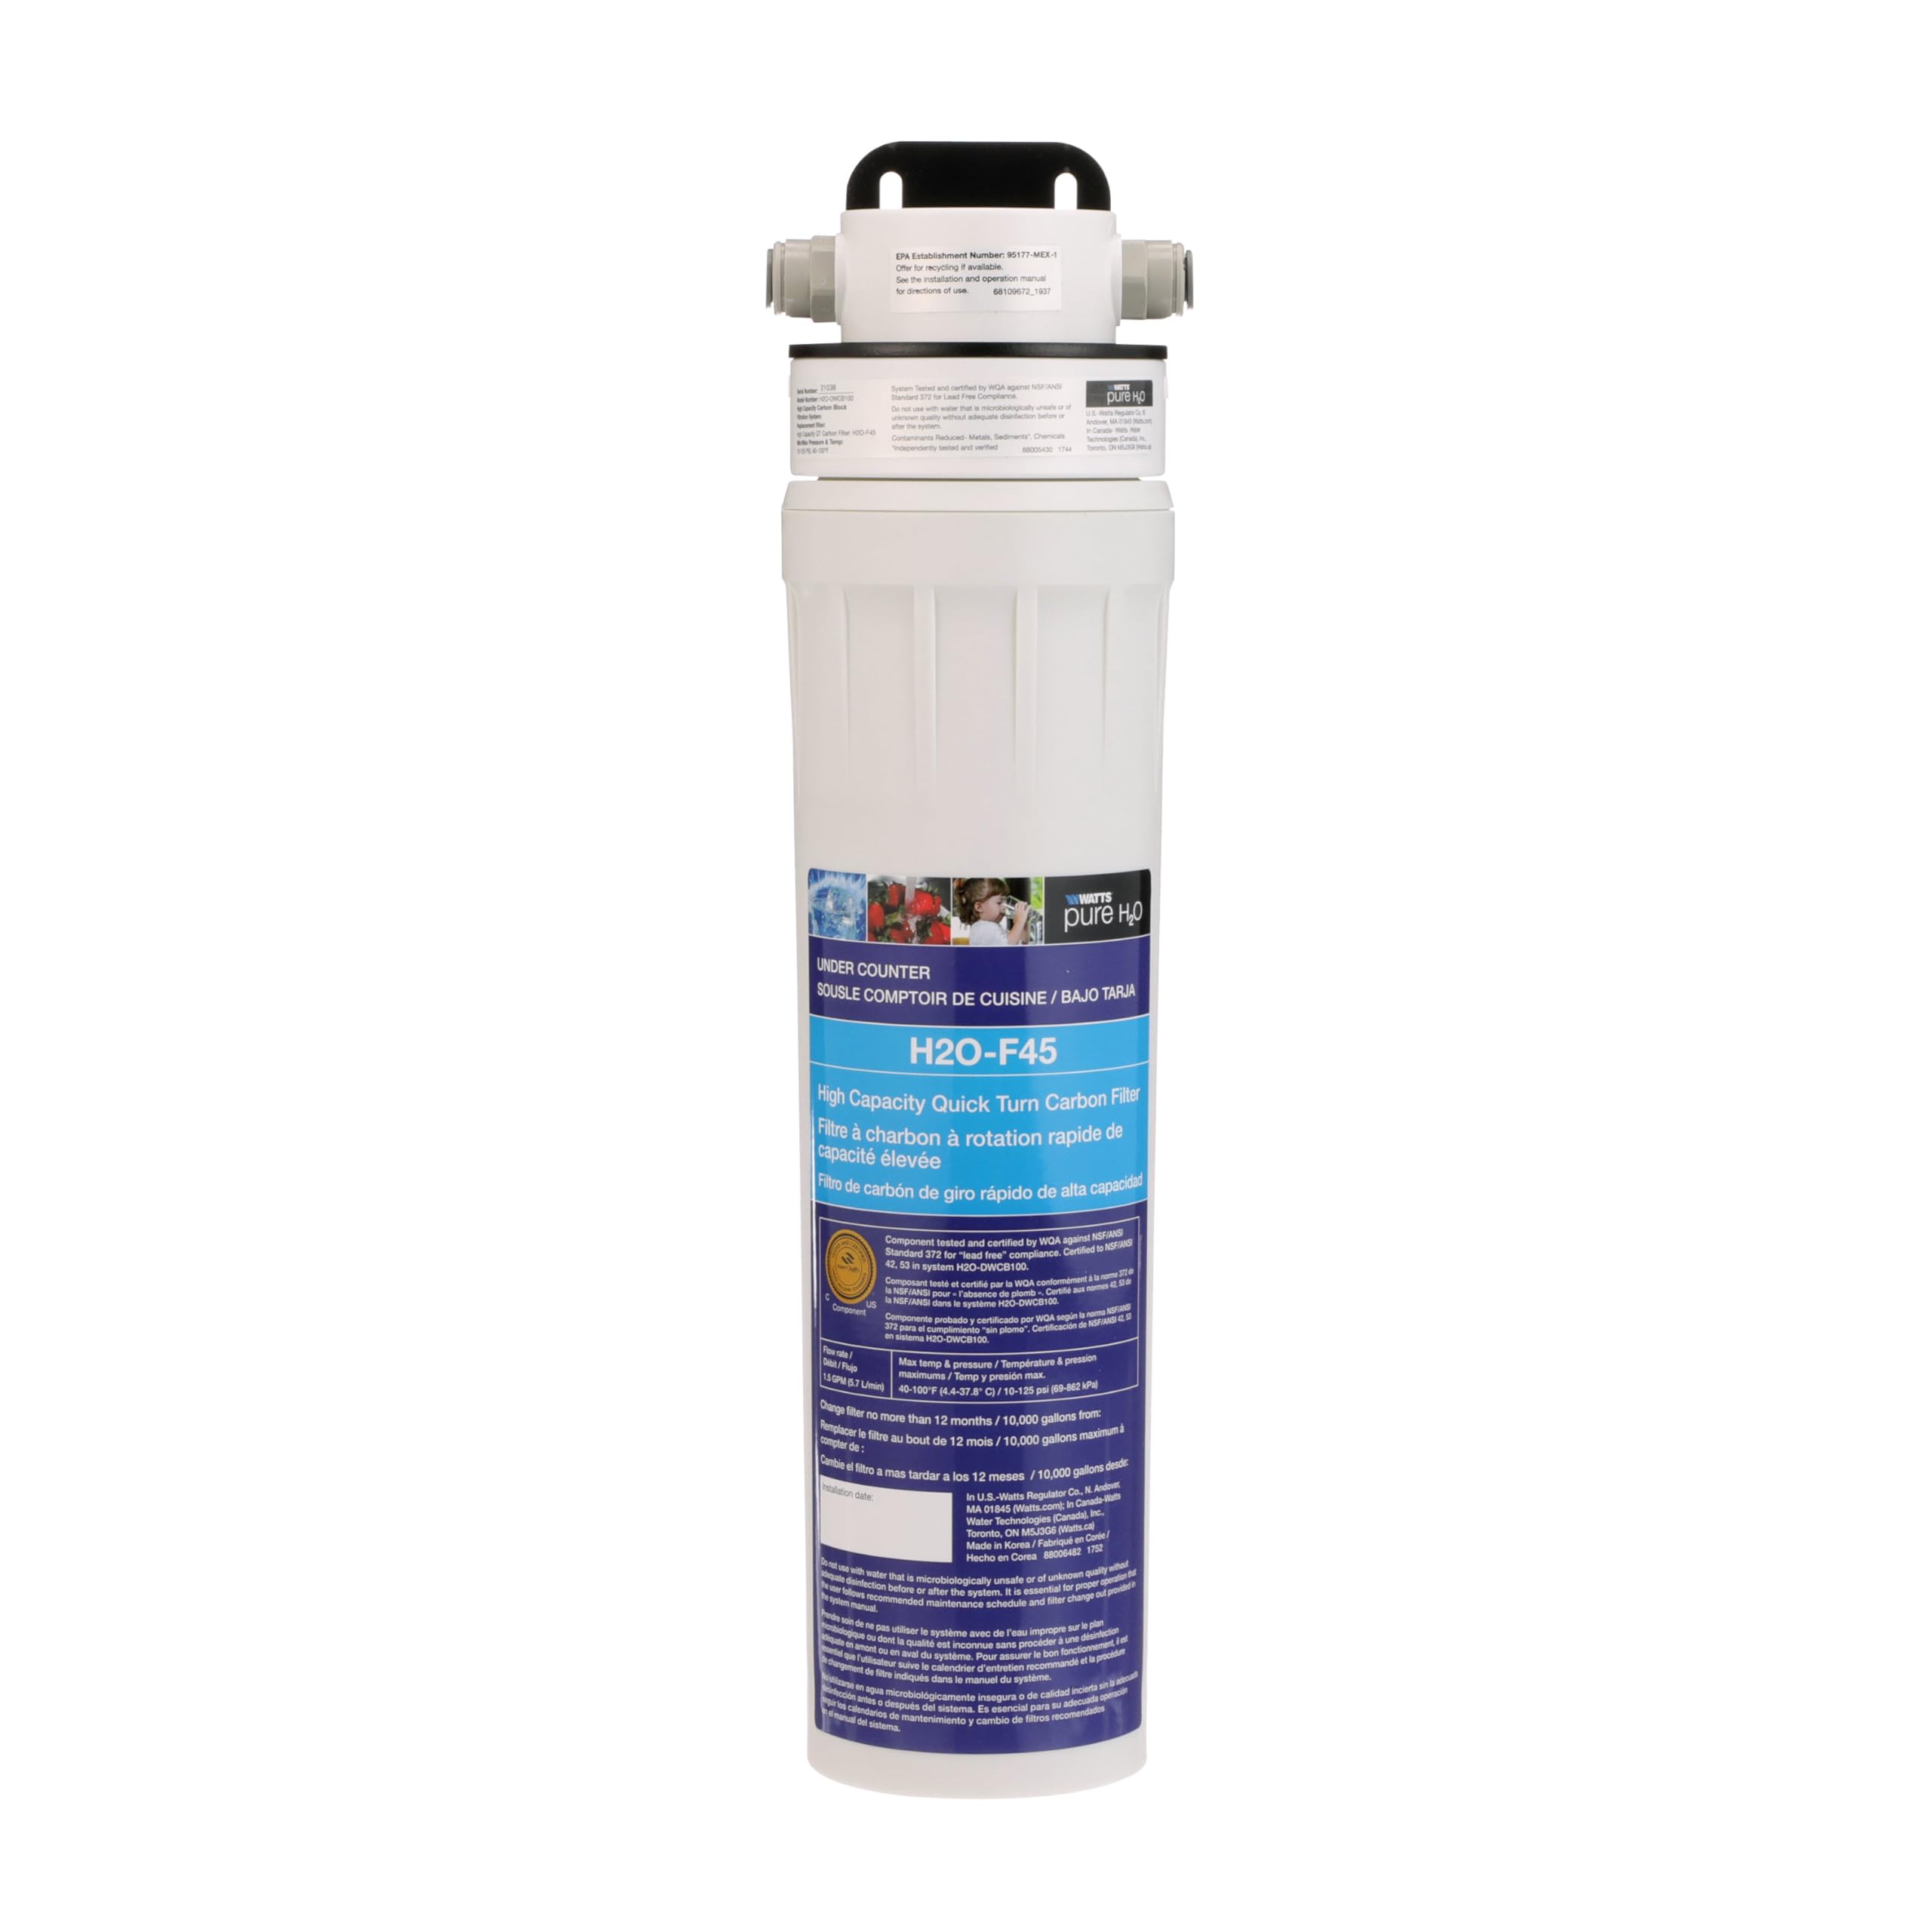 Watts Premier H2O-DWCB100 Pure H2O High Capacity Carbon Block Filtration System